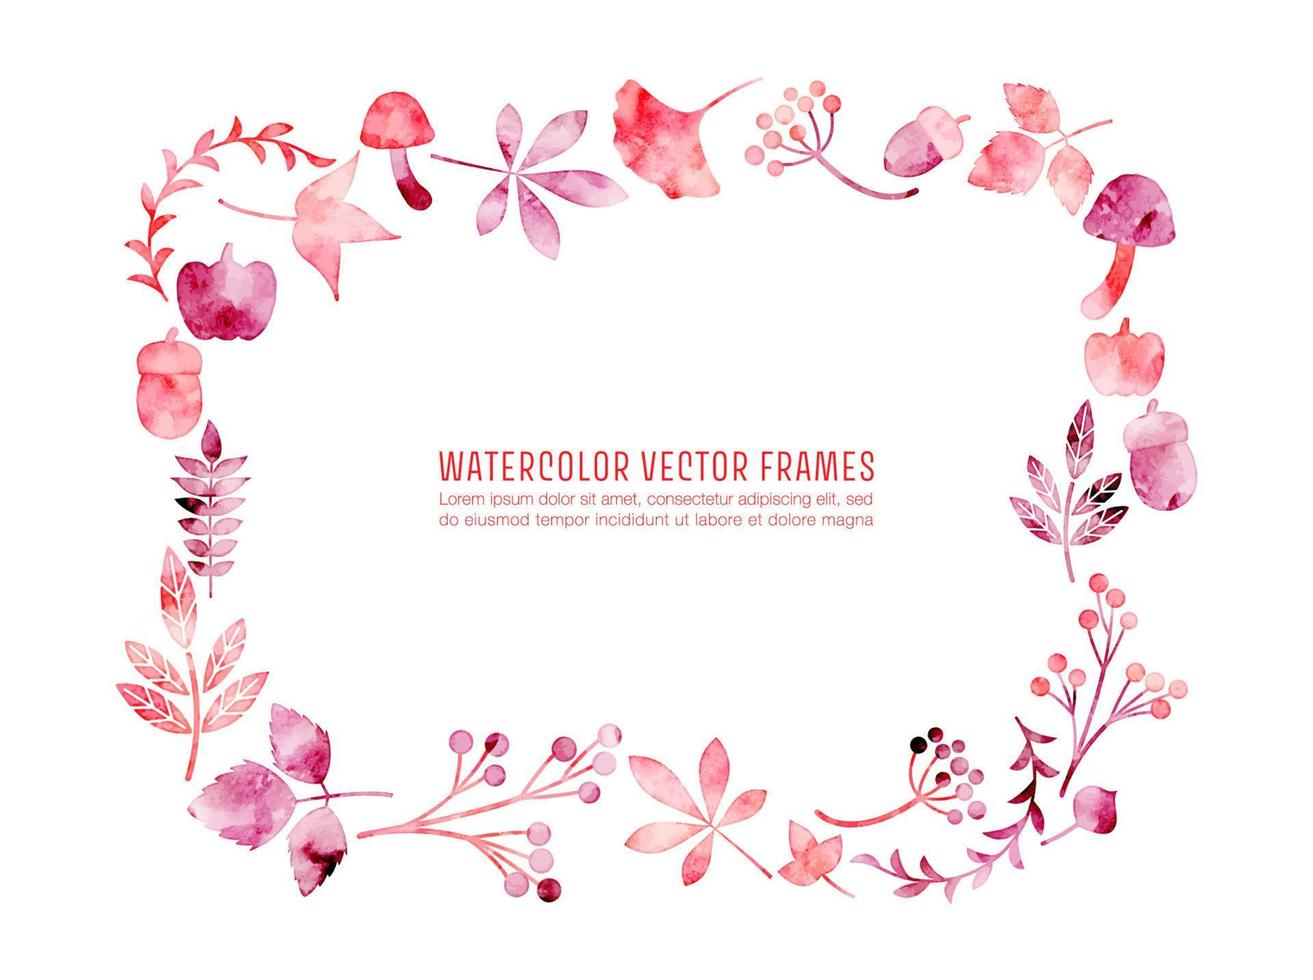 watercolor vector square frames with leaves illustration